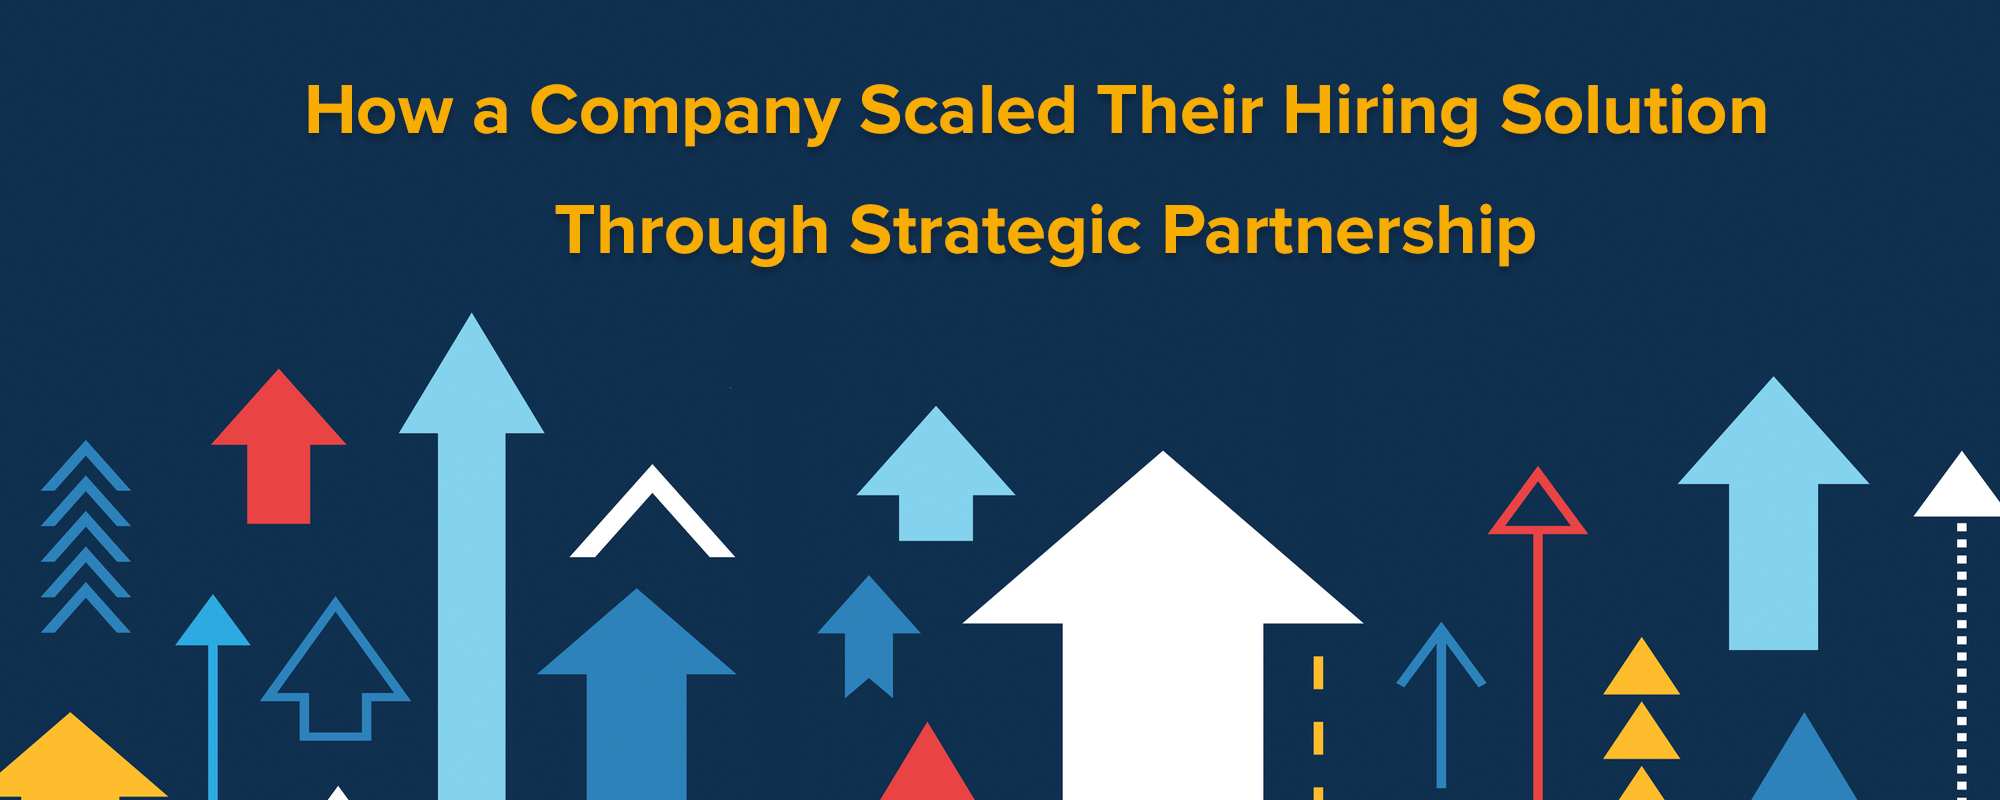 case study: how a company scaled their hiring solution through strategic partnership